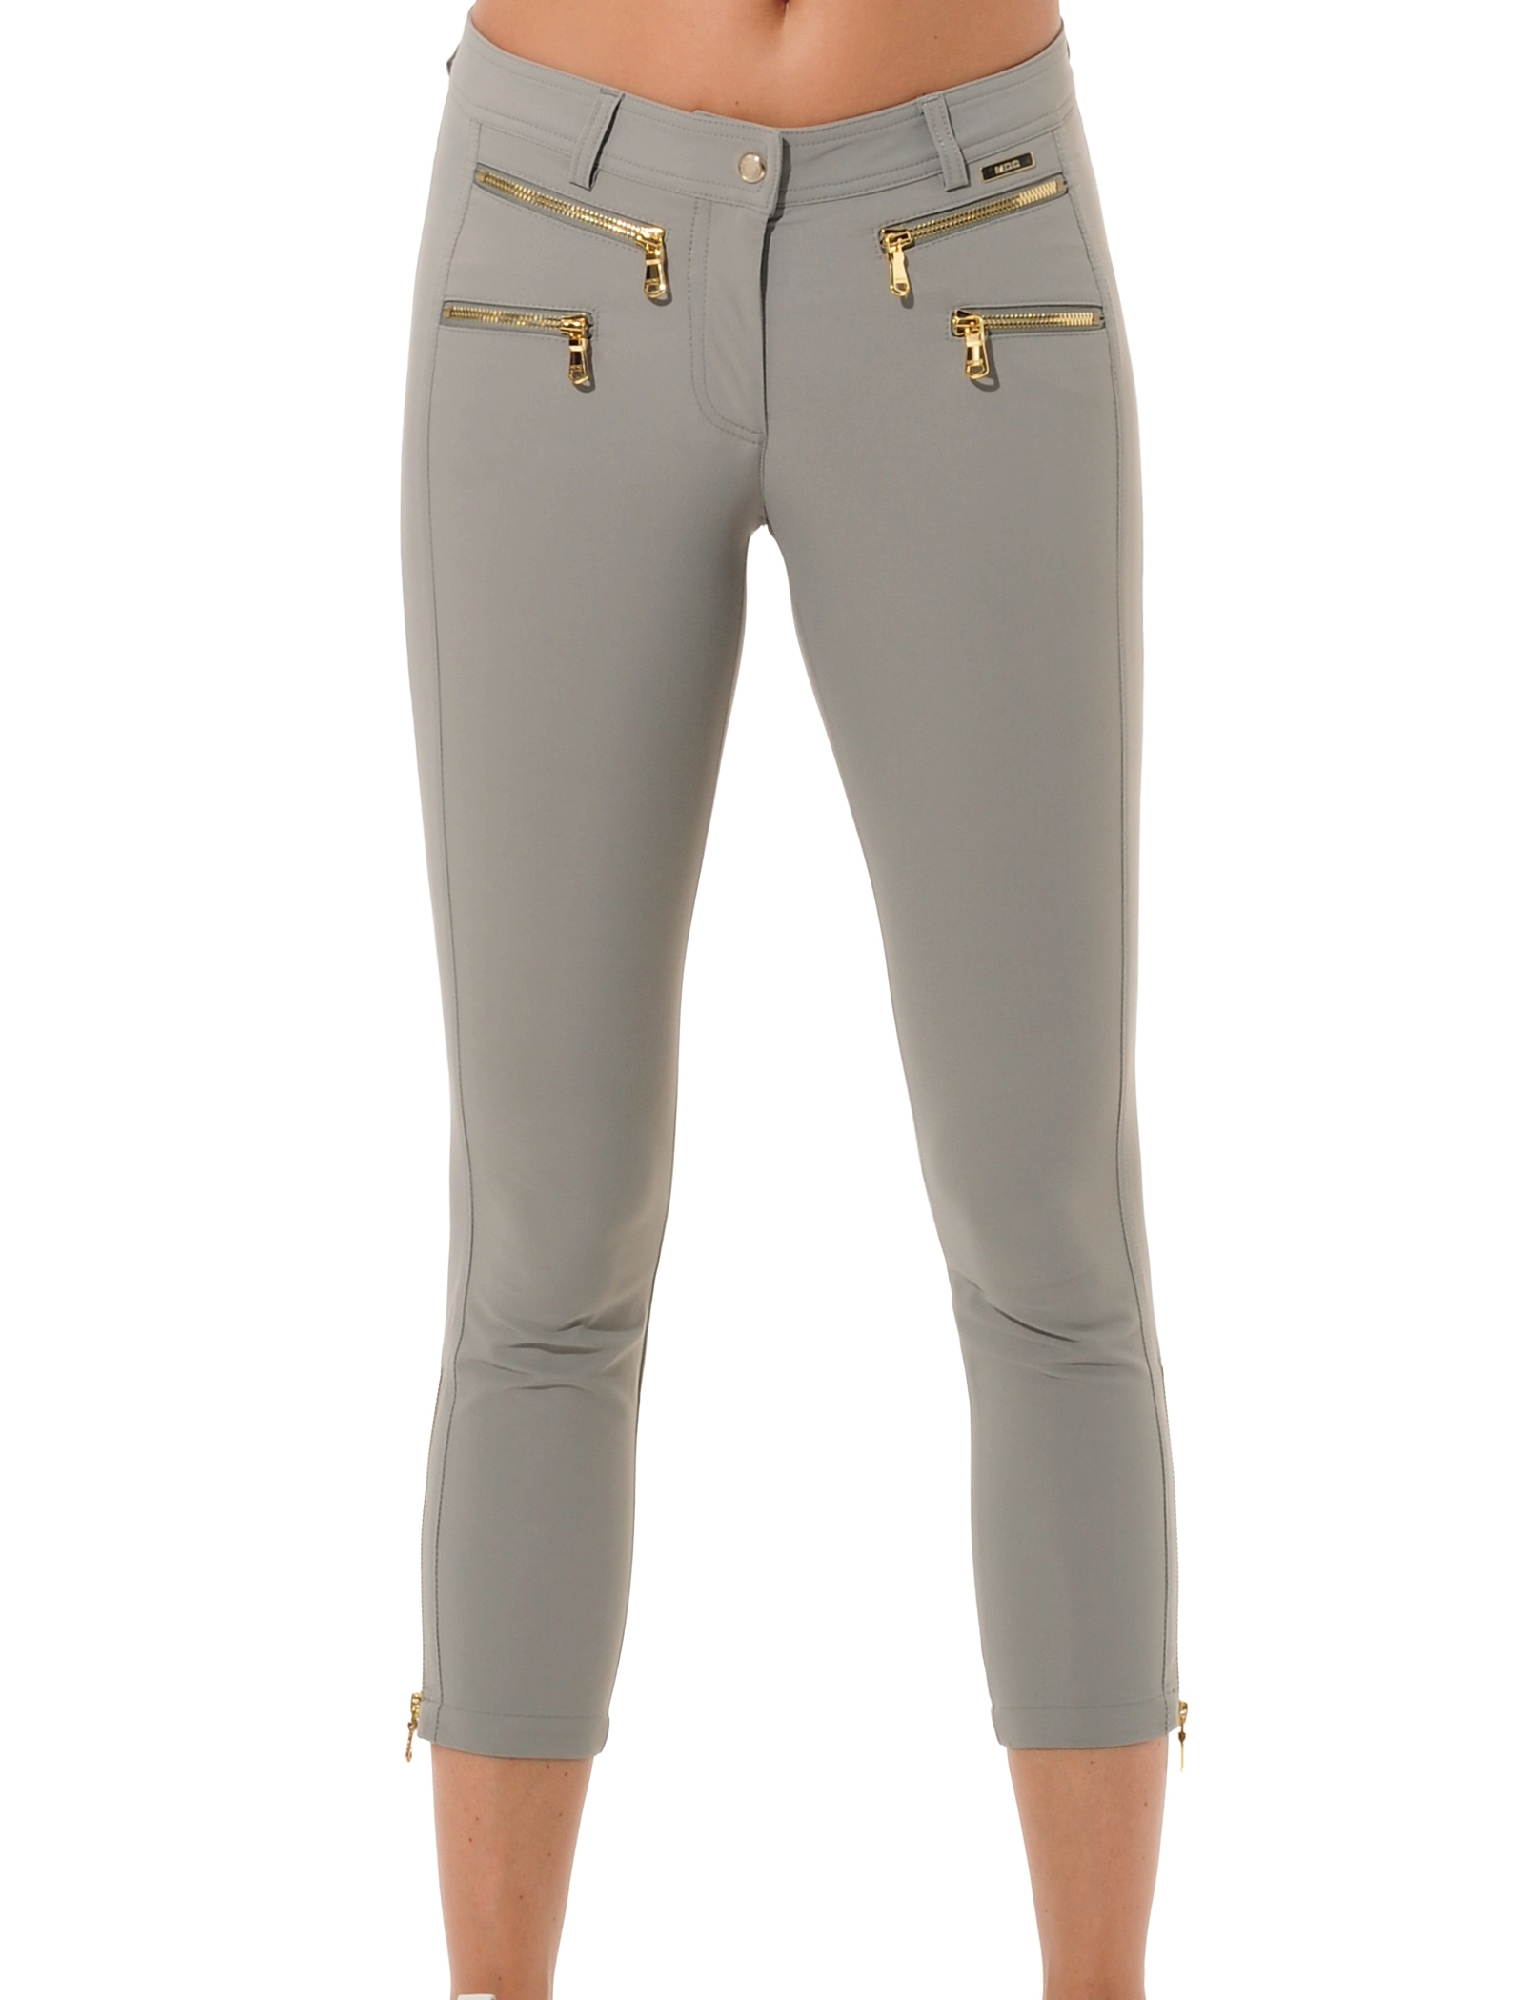 4way stretch shiny gold double zip cropped pants jade 